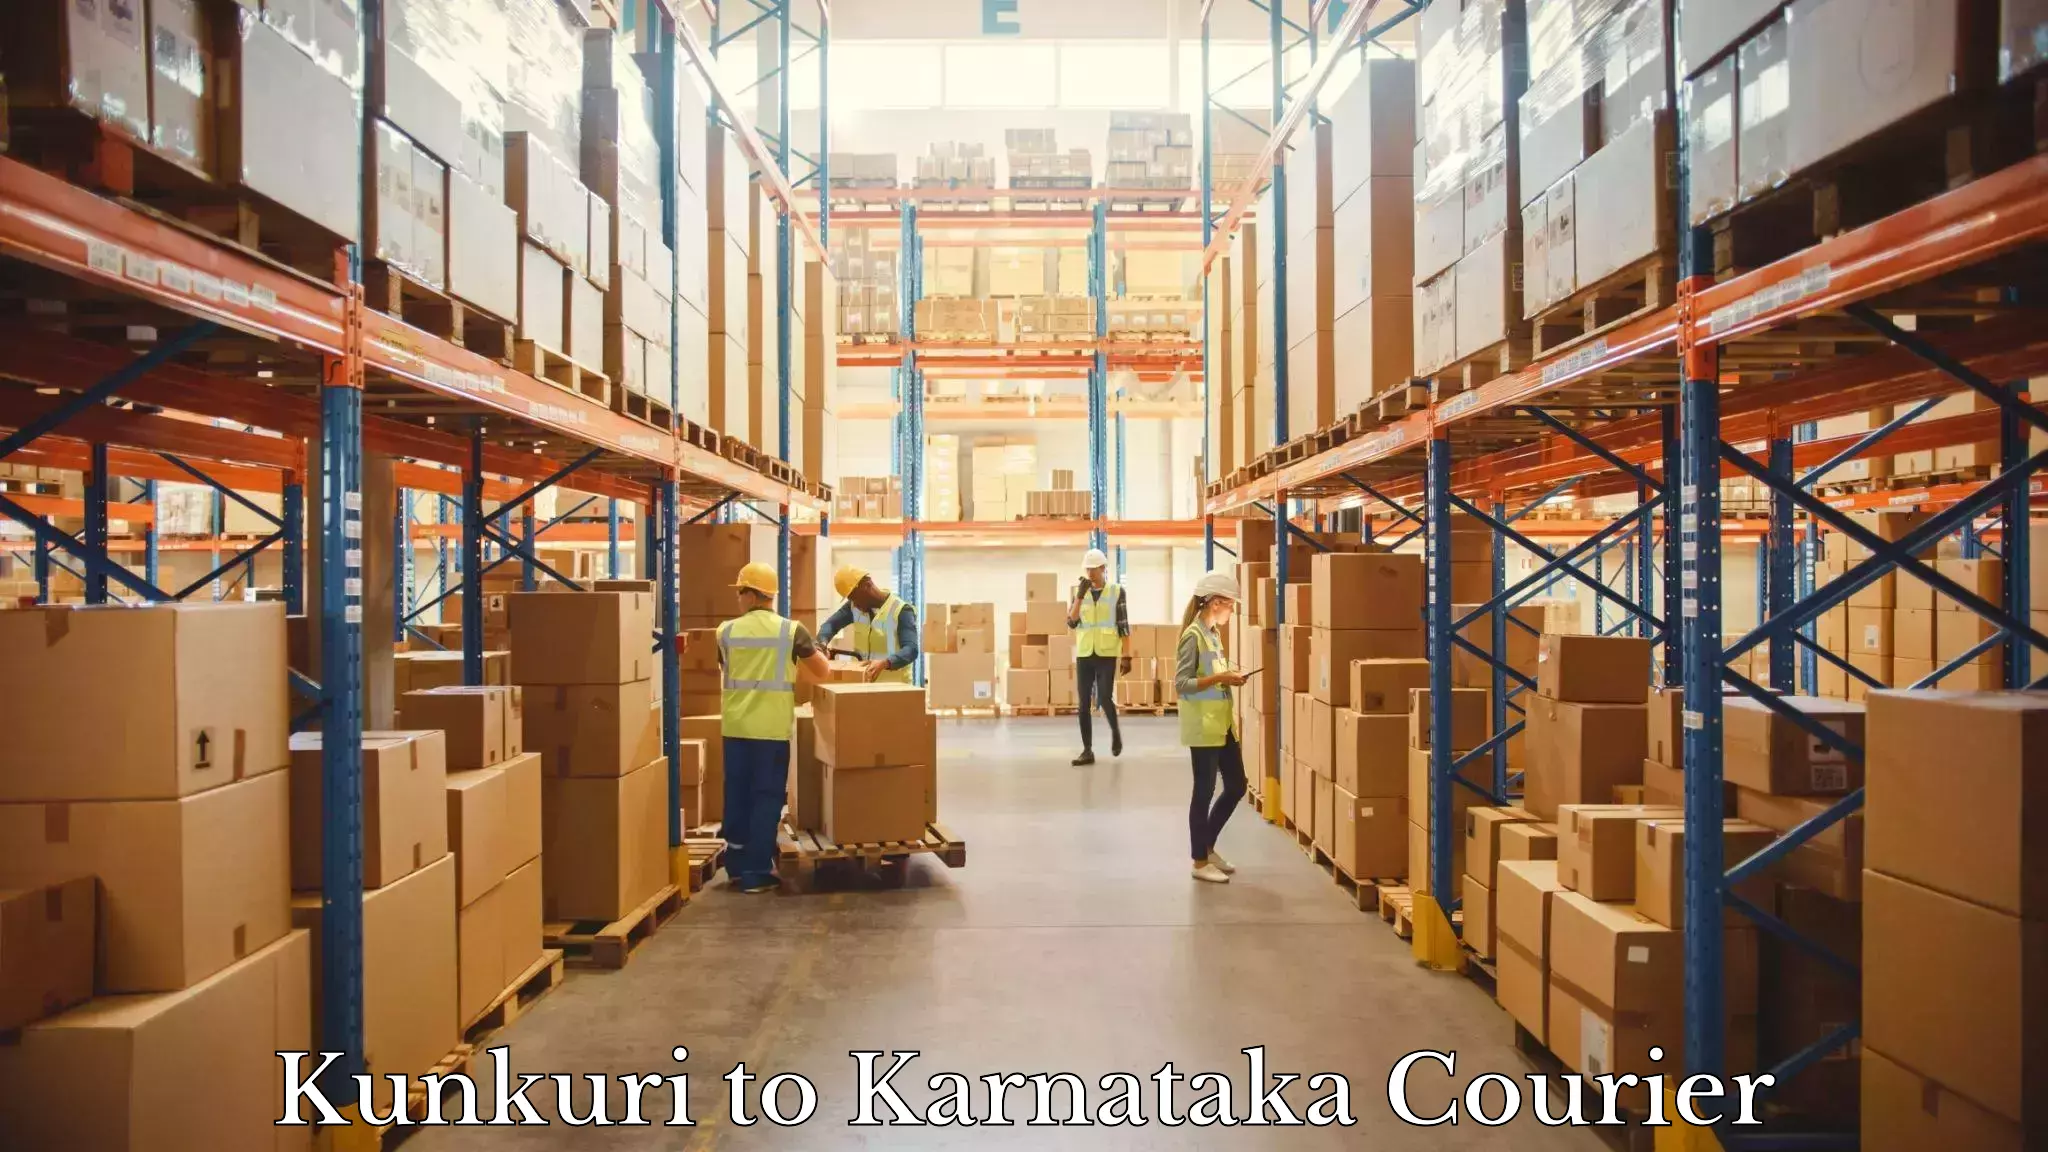 Reliable parcel services in Kunkuri to Nanjangud